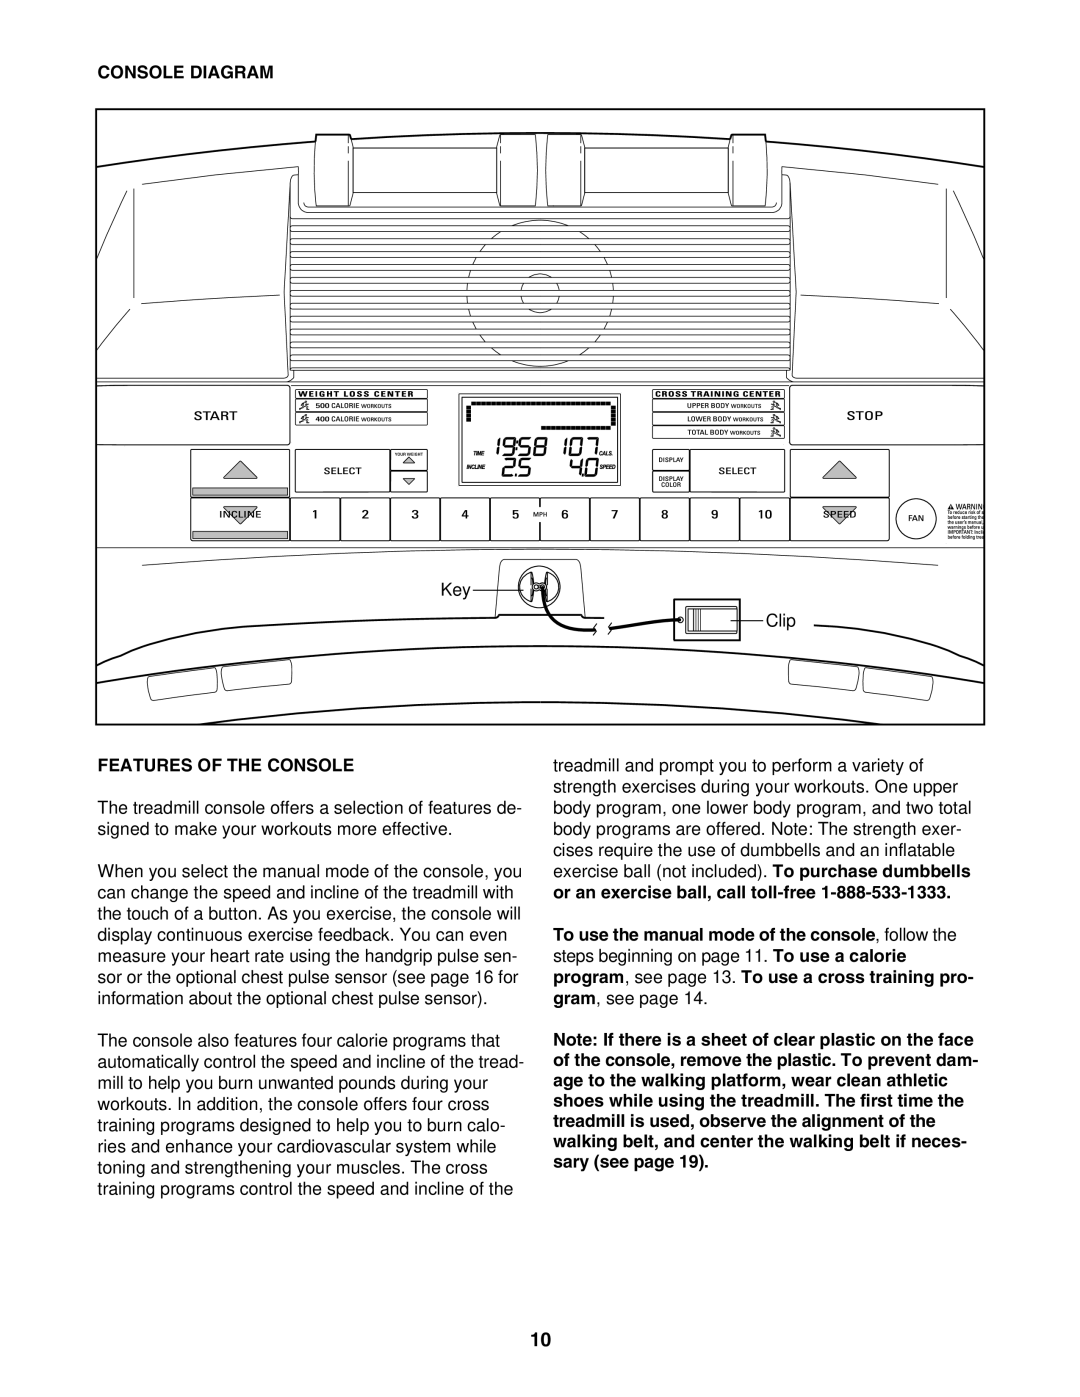 ProForm 831.24645.0 user manual Console Diagram, Features of the Console 